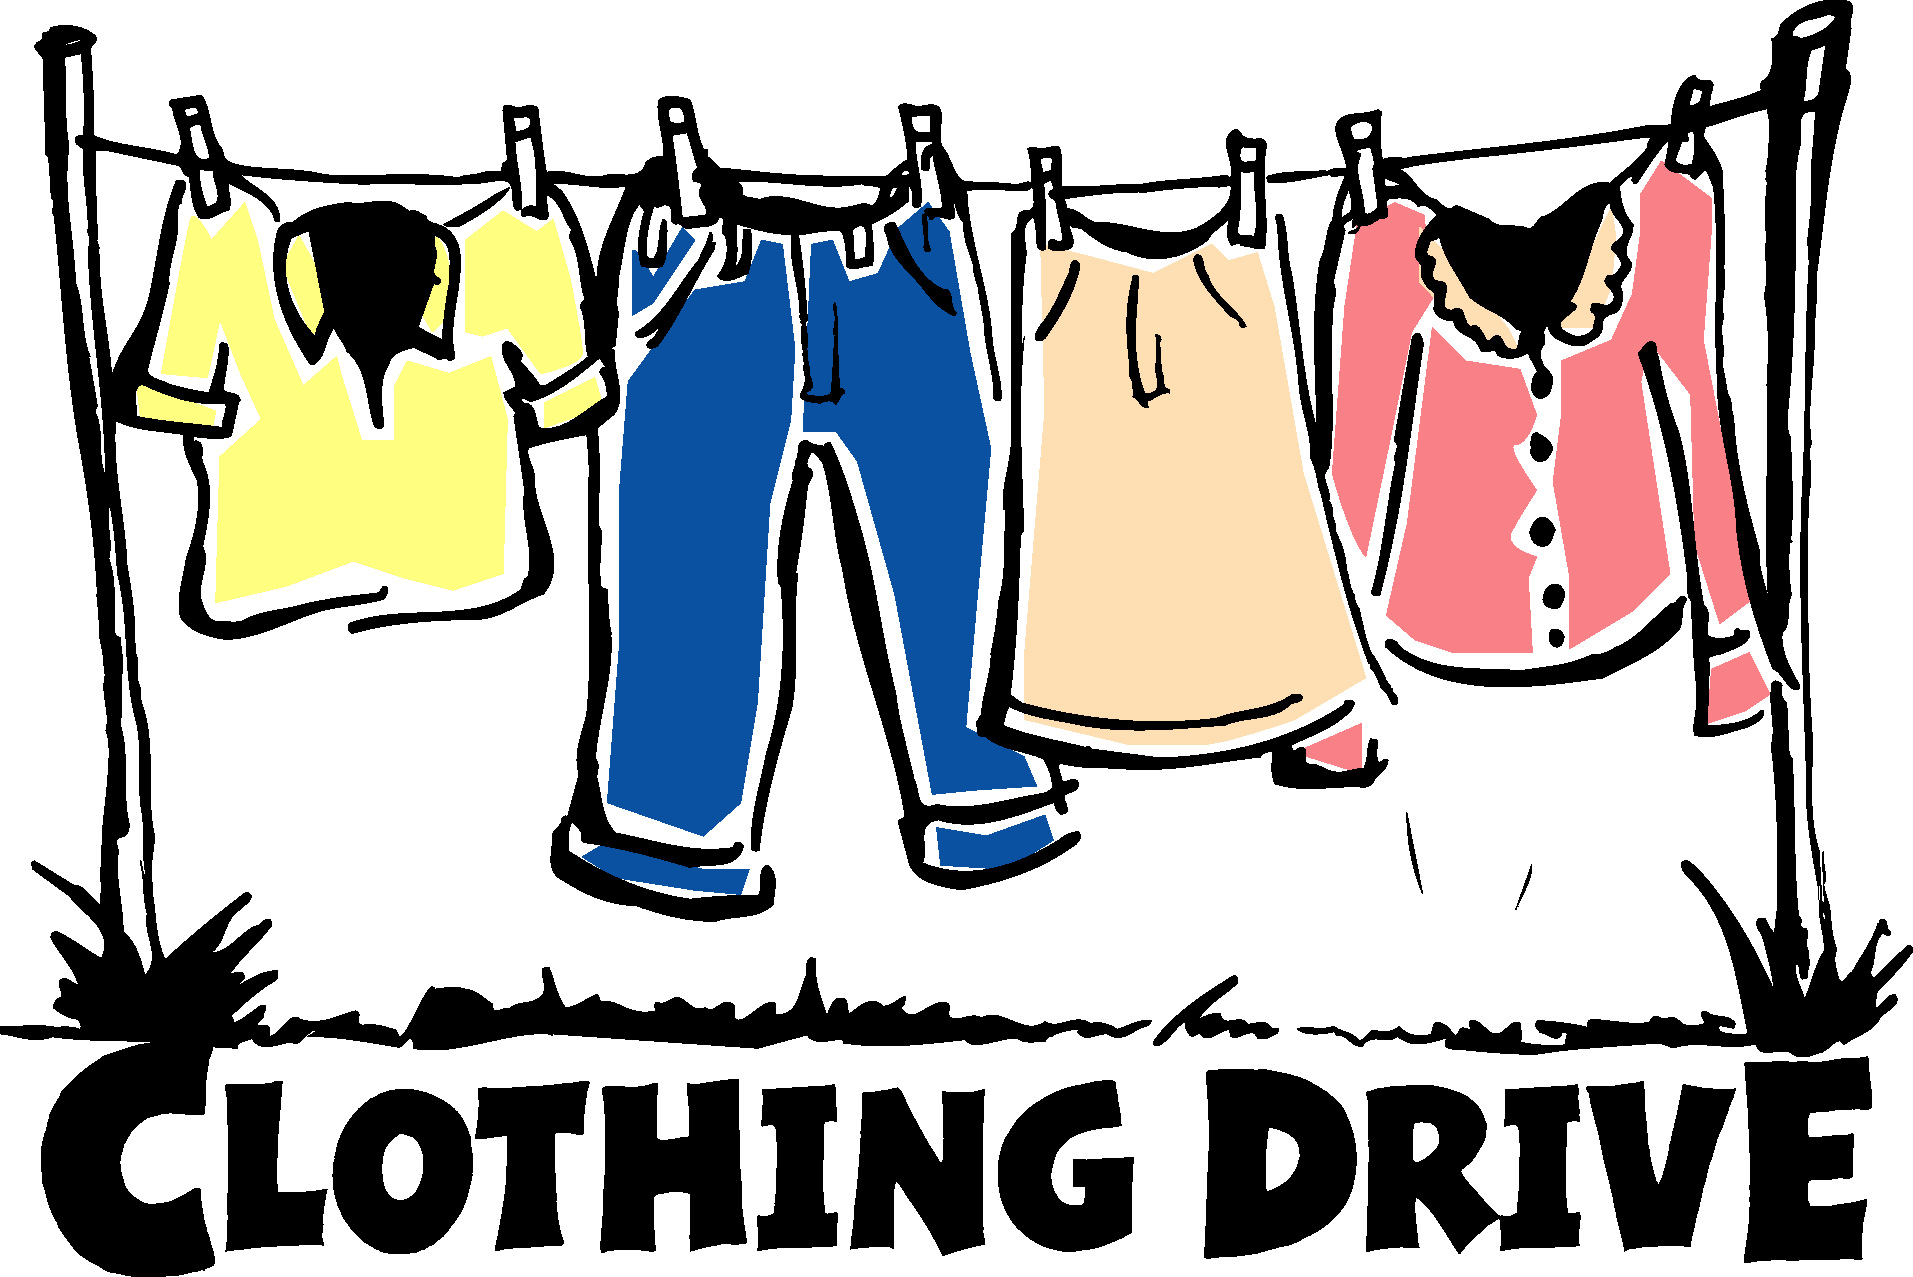 Clothing Drive Hd Image Clipart